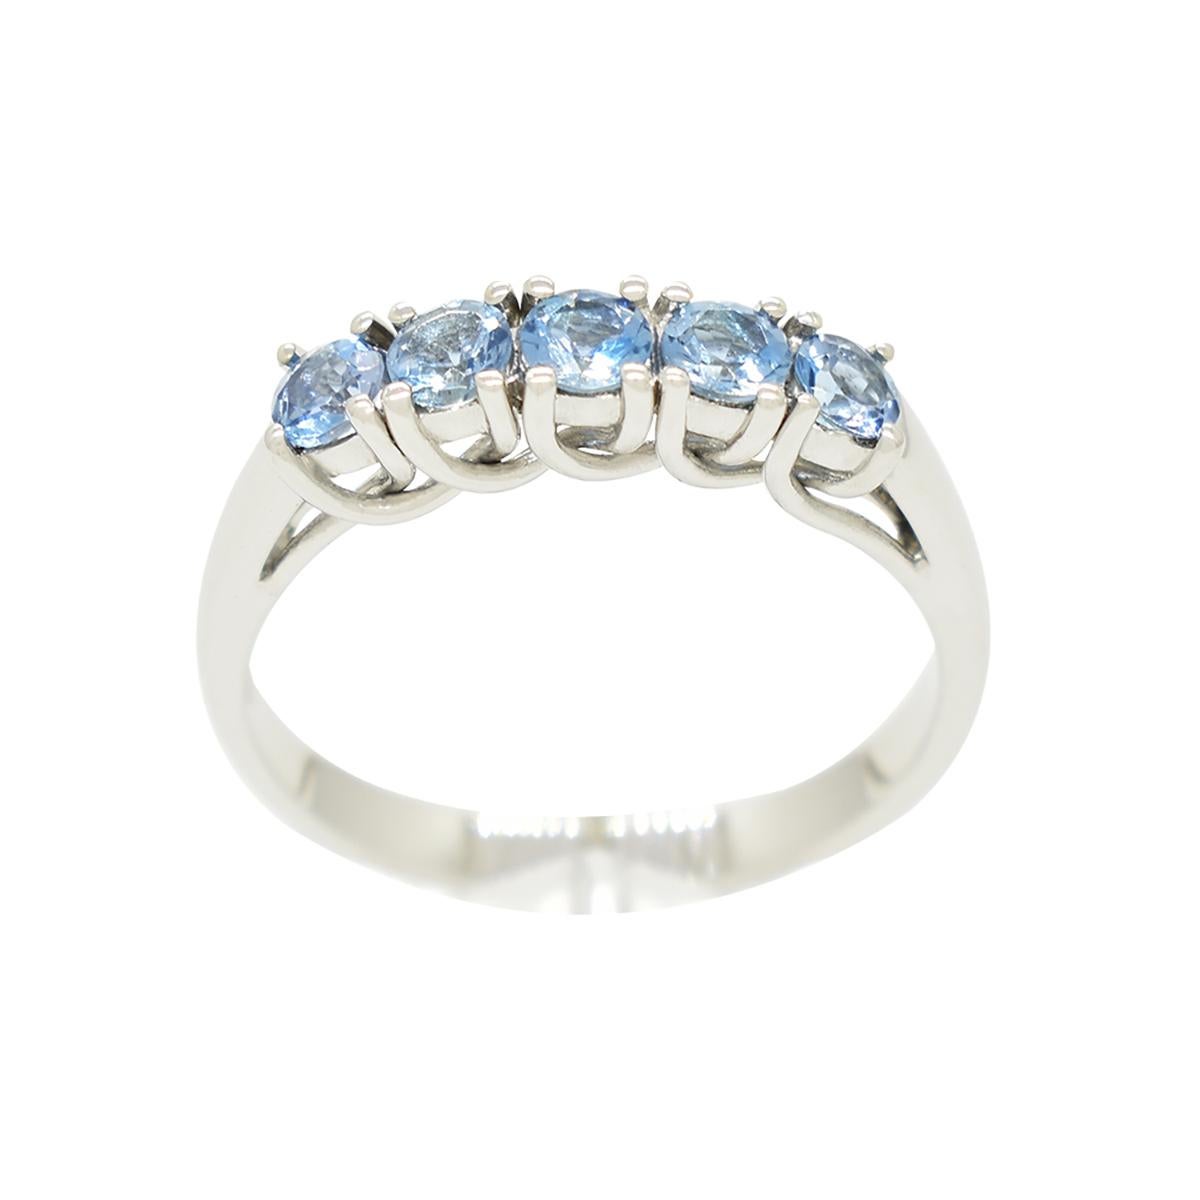 This is a wonderful aquamarine ring with a beautiful selection of 5 round cut natural aquamarines with a stunning medium blue color, excellent clarity and fantastic brightness, which makes them exceptional quality gemstones. The entire ring is